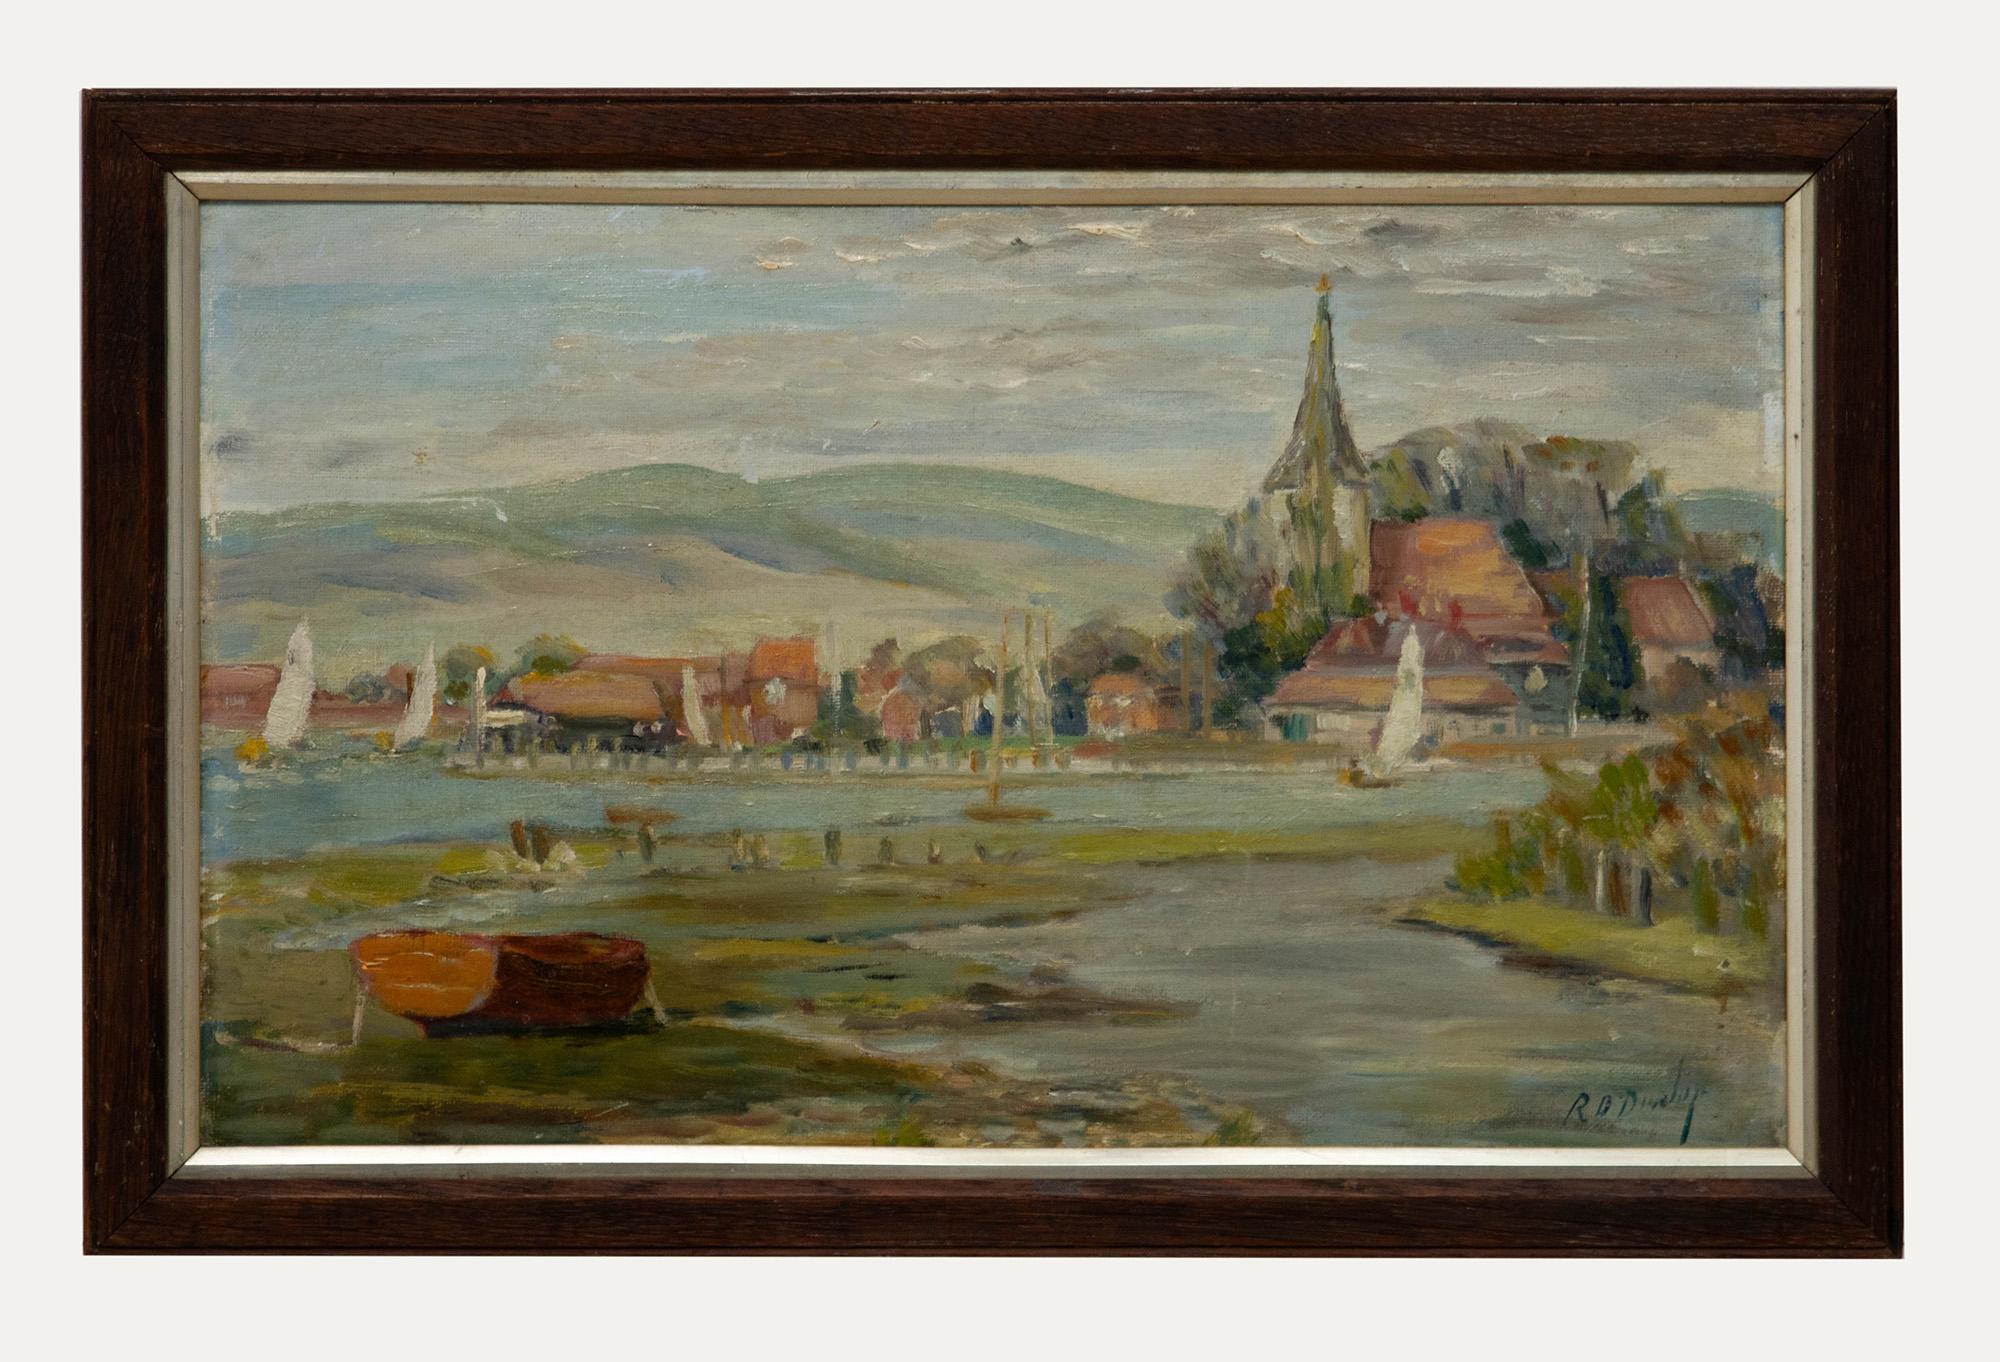 Ronald Ossory Dunlop (1894-1973), estuary scene in oil. Signed lower right. Presented in a stunning oak frame with internal gilt slip. Inscribed to the reverse by a later hand.' R. O. Dunlop'. On canvas board. 